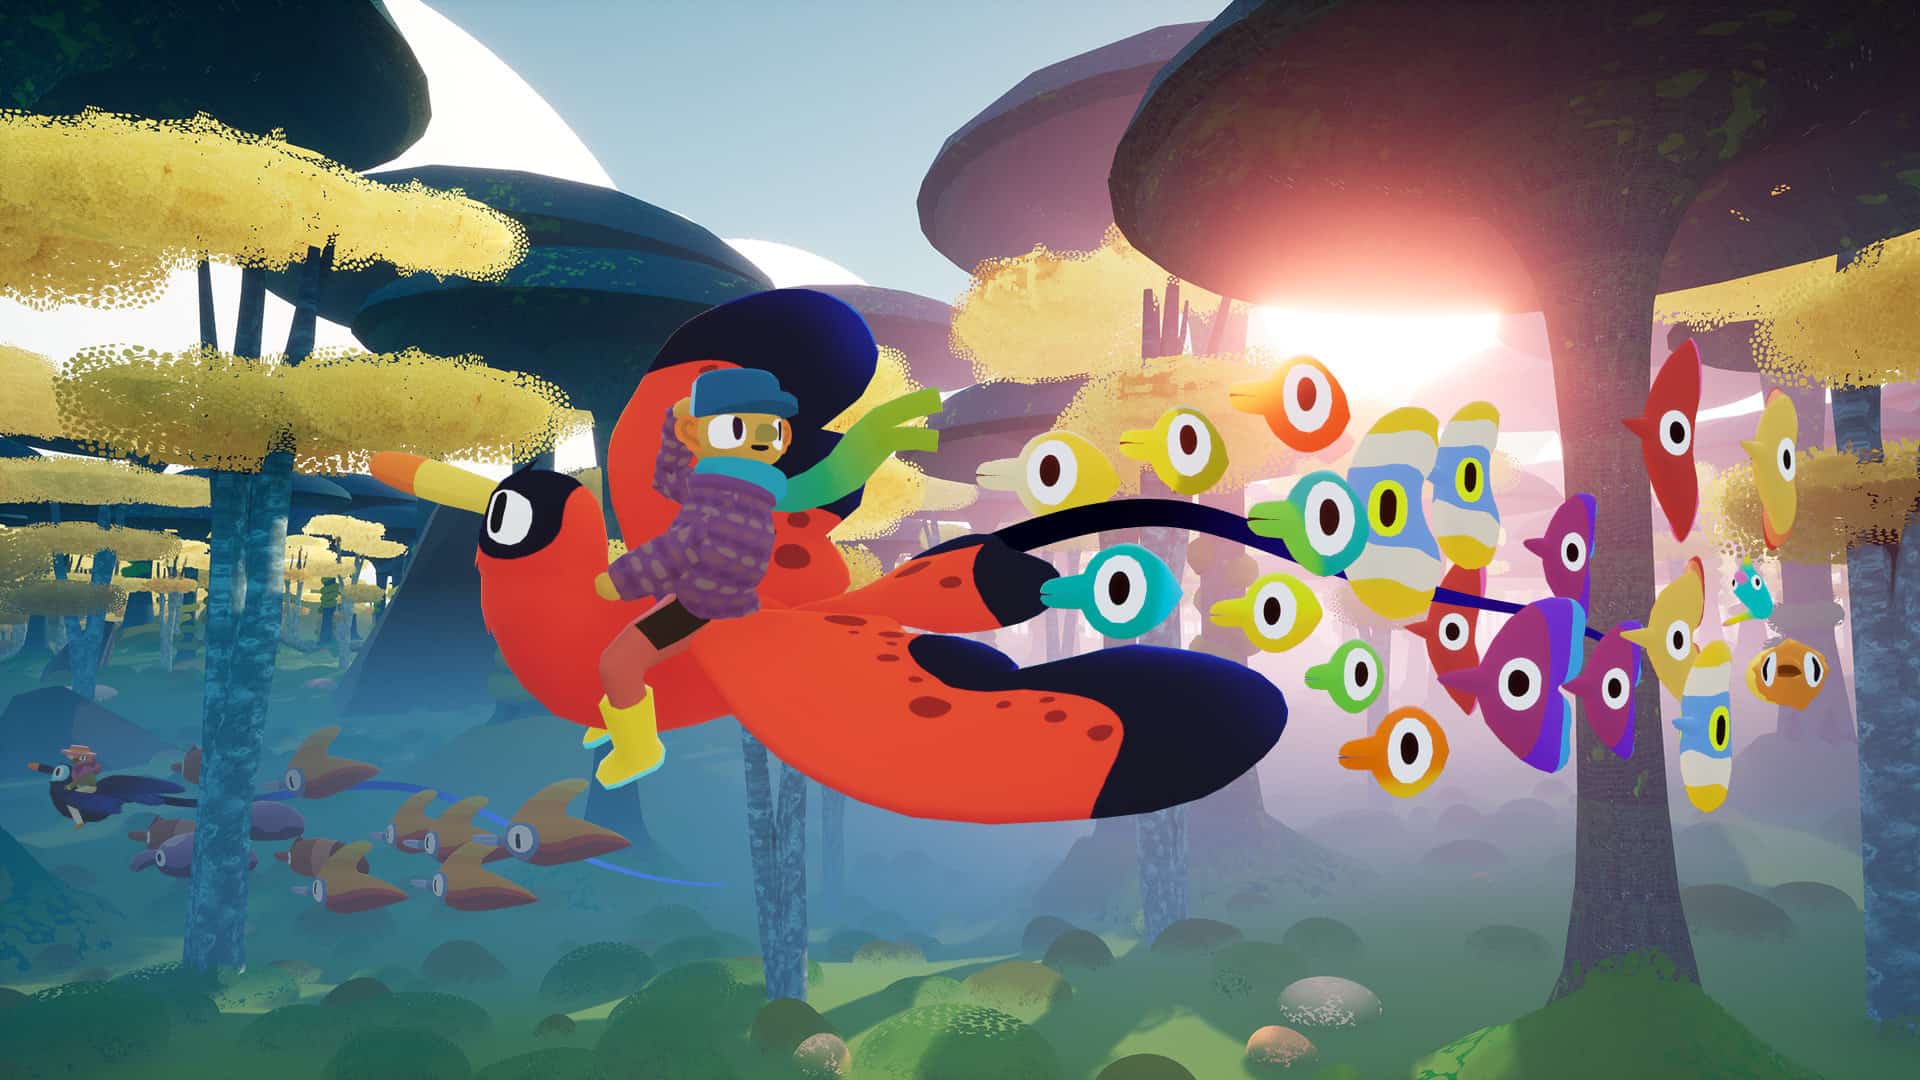 Flock is an upcoming co-op game about the joys of flight